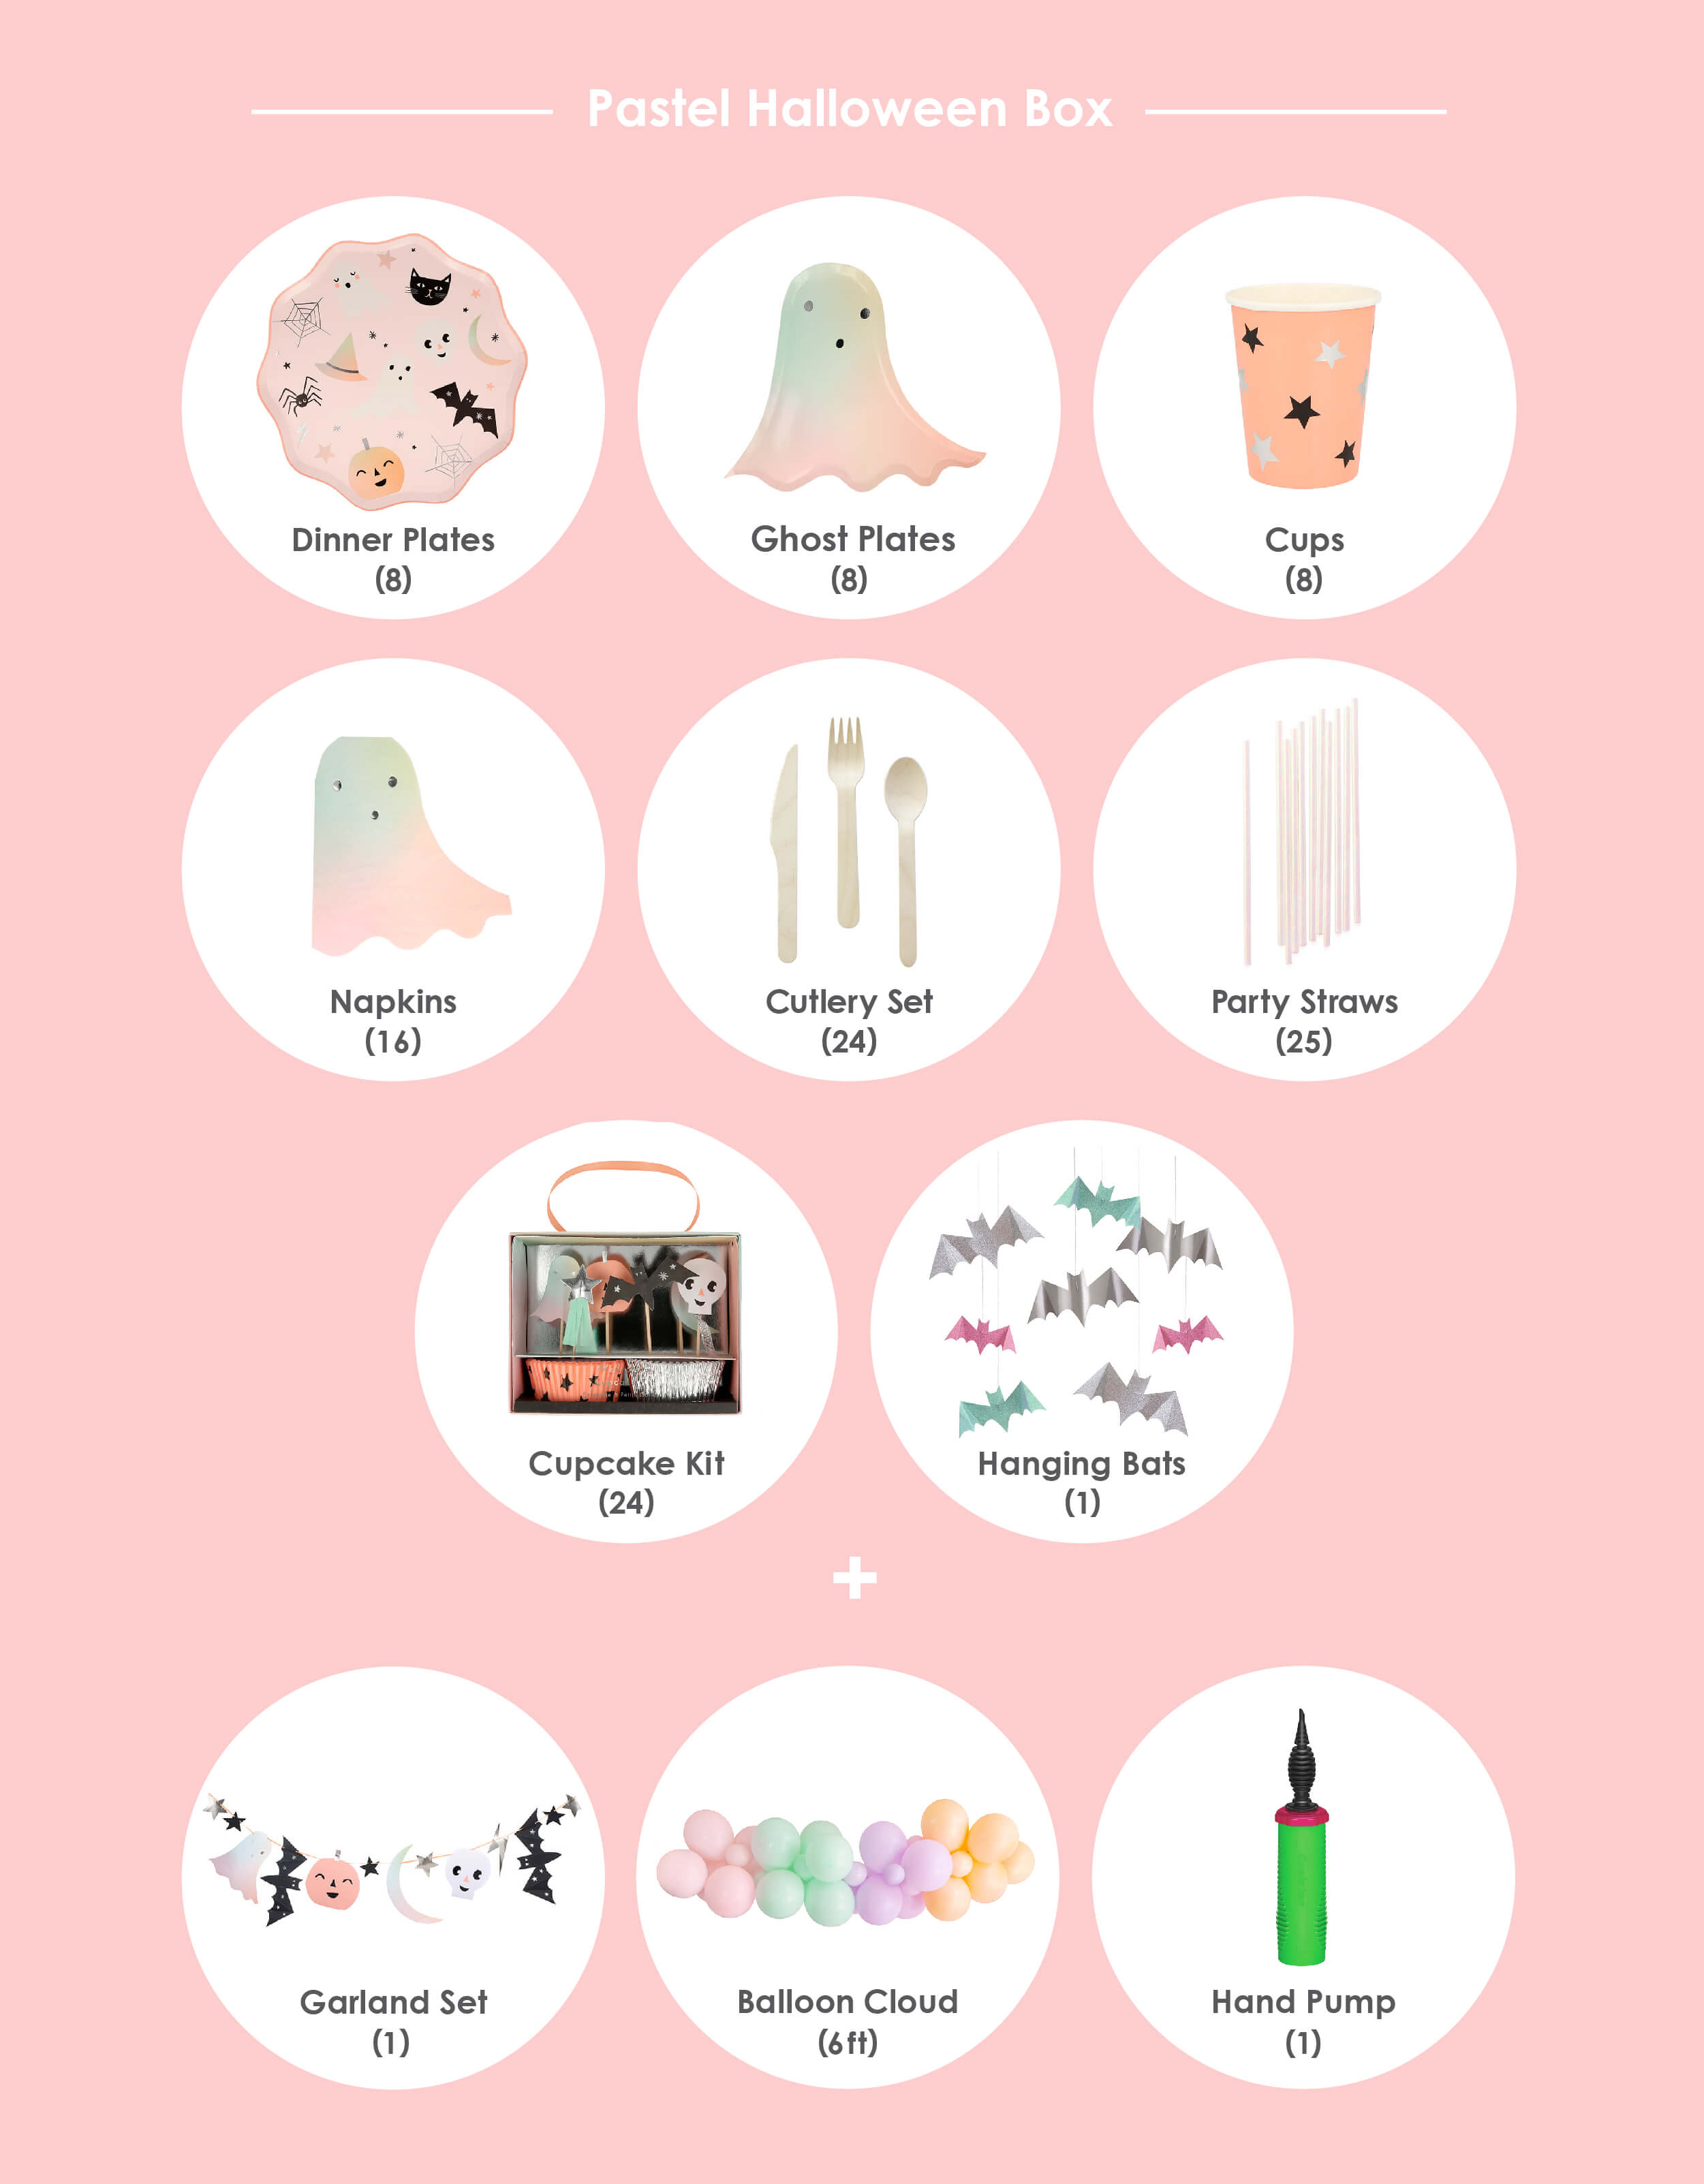 Momo Party Pastel Halloween Box Kit. box included Meri Meri Pastel Halloween Dinner Plates, Pastel Ombre Halloween Ghost Plates, Pastel Halloween Star Pattern Cups, Pastel Ombre Halloween Ghost Napkins, Wooden Cutlery set, Iridescent Party Straws, Pastel Halloween Cupcake Kit with 24 toppers, Pastel Halloween Glitter Hanging Bats, Pastel Halloween Garland  and a 6 ft Pastel Balloon Cloud, hand and pump for a easy diy halloween party set up 